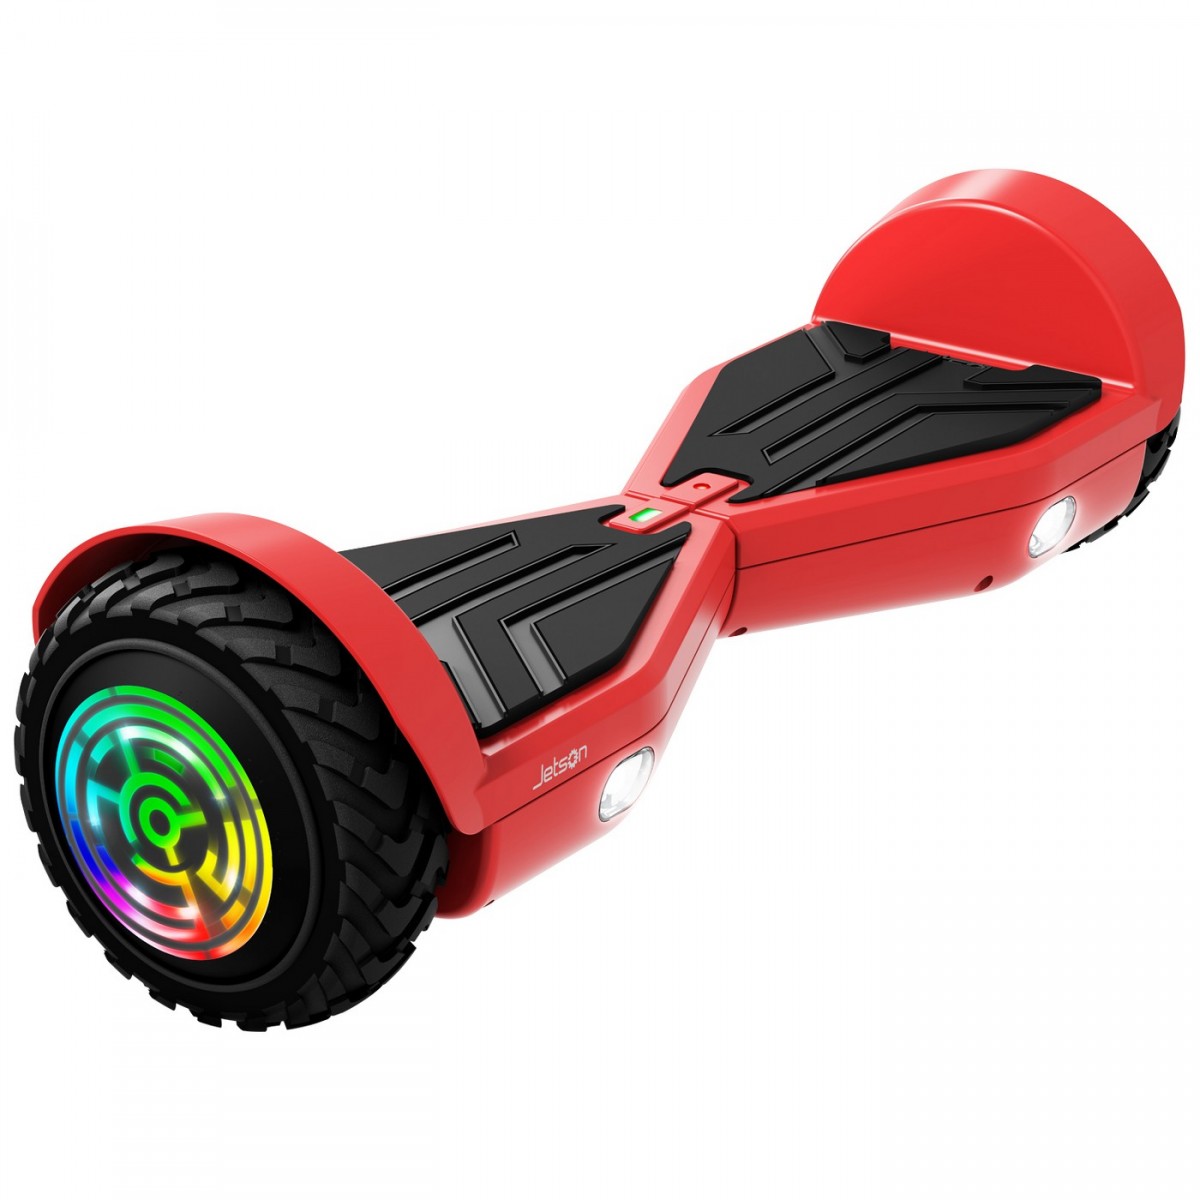 *Black Friday Now* Jetson Rogue Hoverboard with Galaxy LightUp Wheels